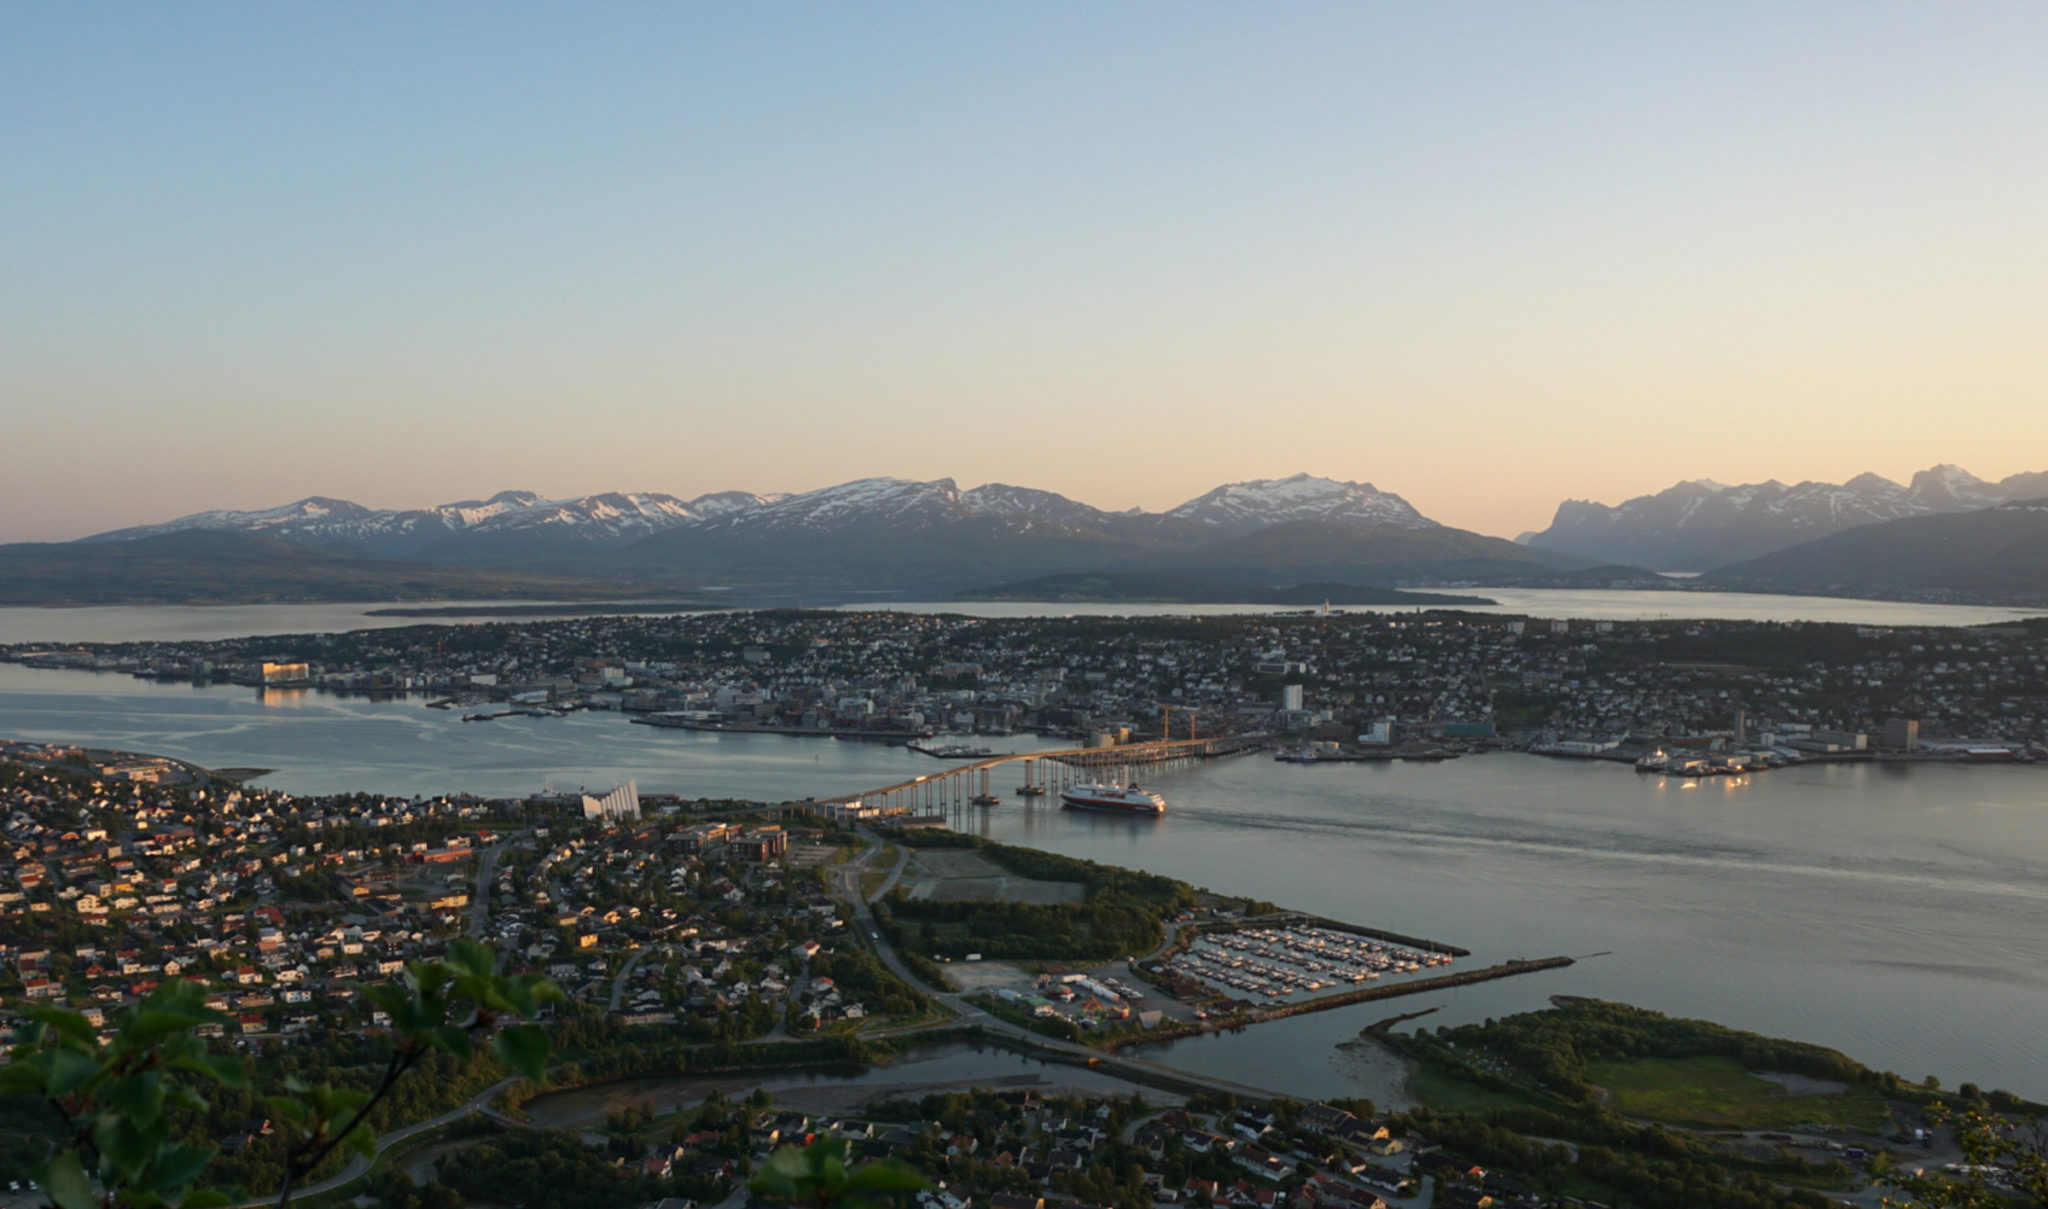 It is half past elleven, and the south boand Hurtigruten is calling at Tromsø © Knut Hansvold